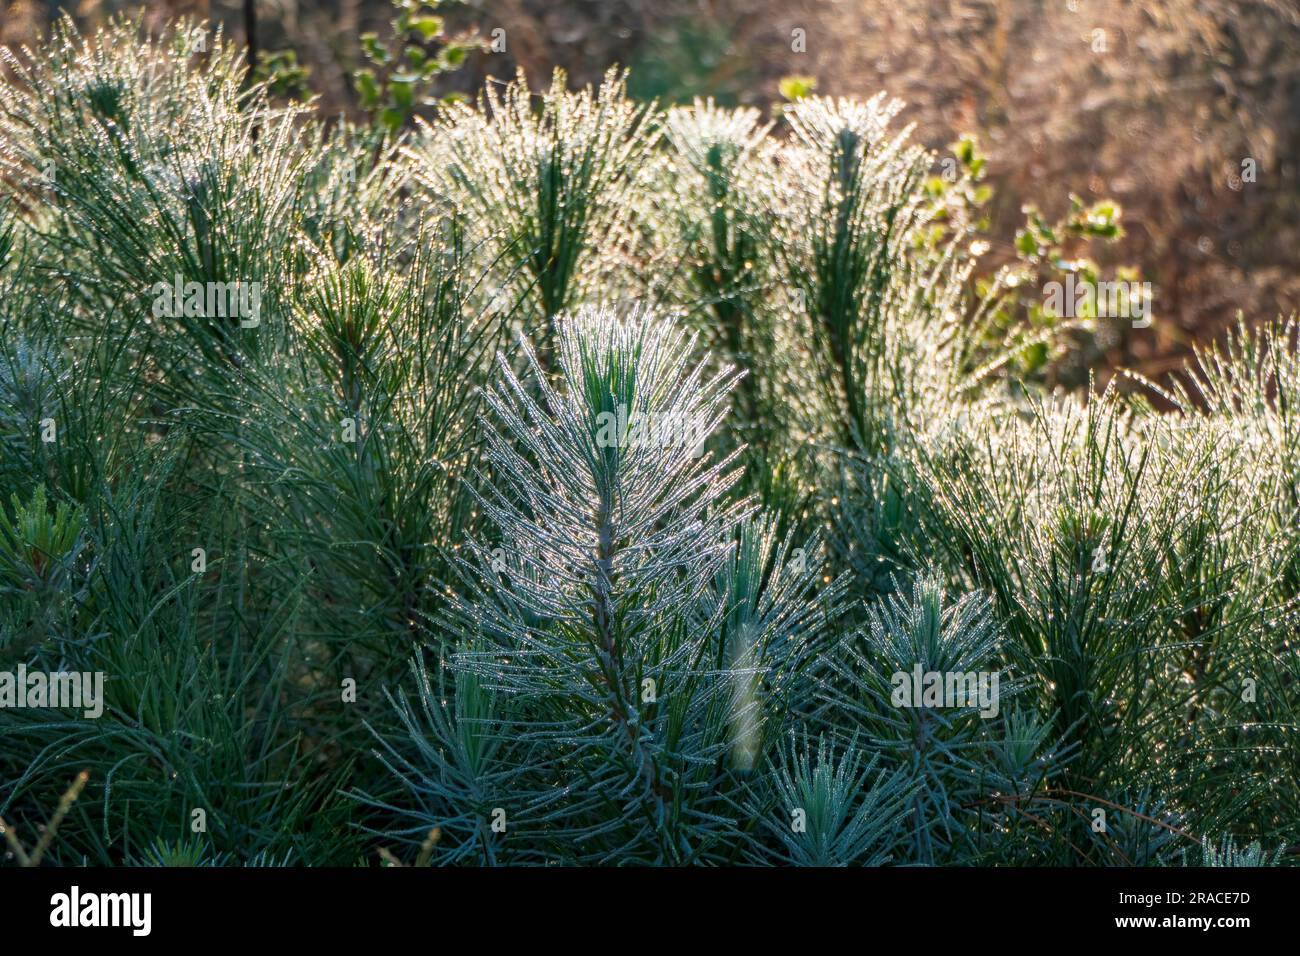 Young shoots of a pine tree in dew close-up. Mount Carmel at sunrise. Israel Stock Photo